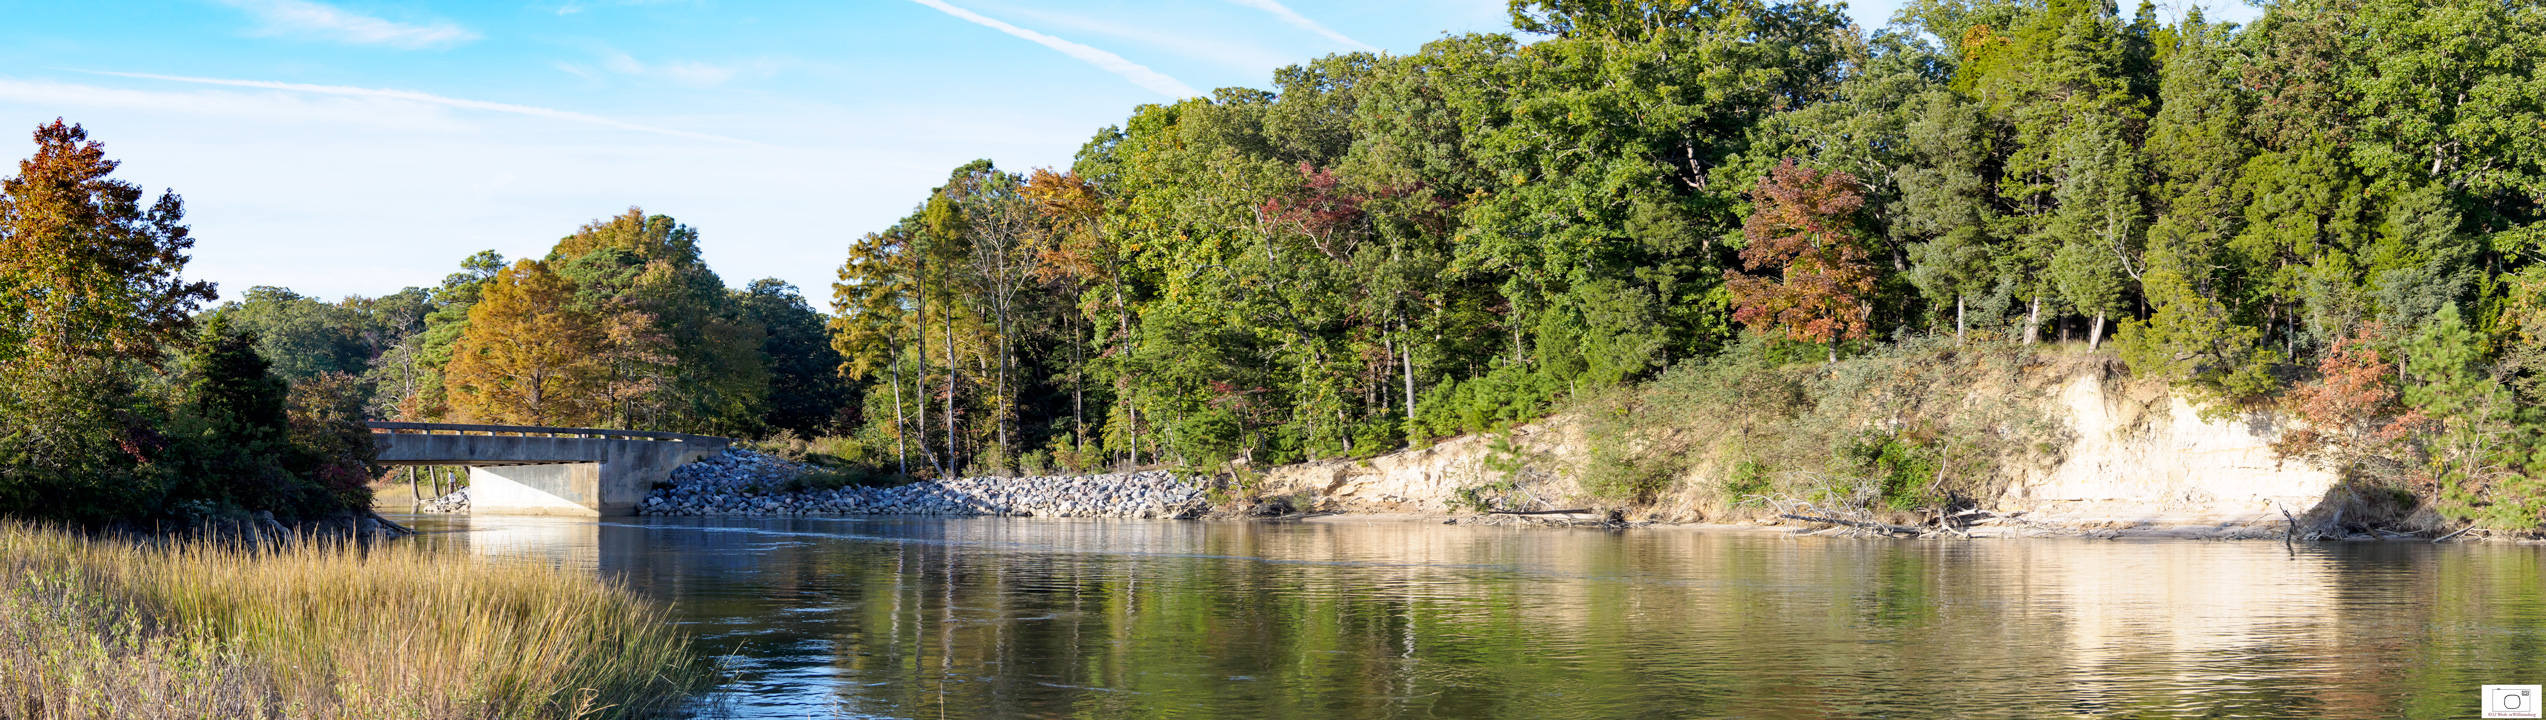 Fall Afternoon at College Creek Flowing Toward the Beach - October 2015